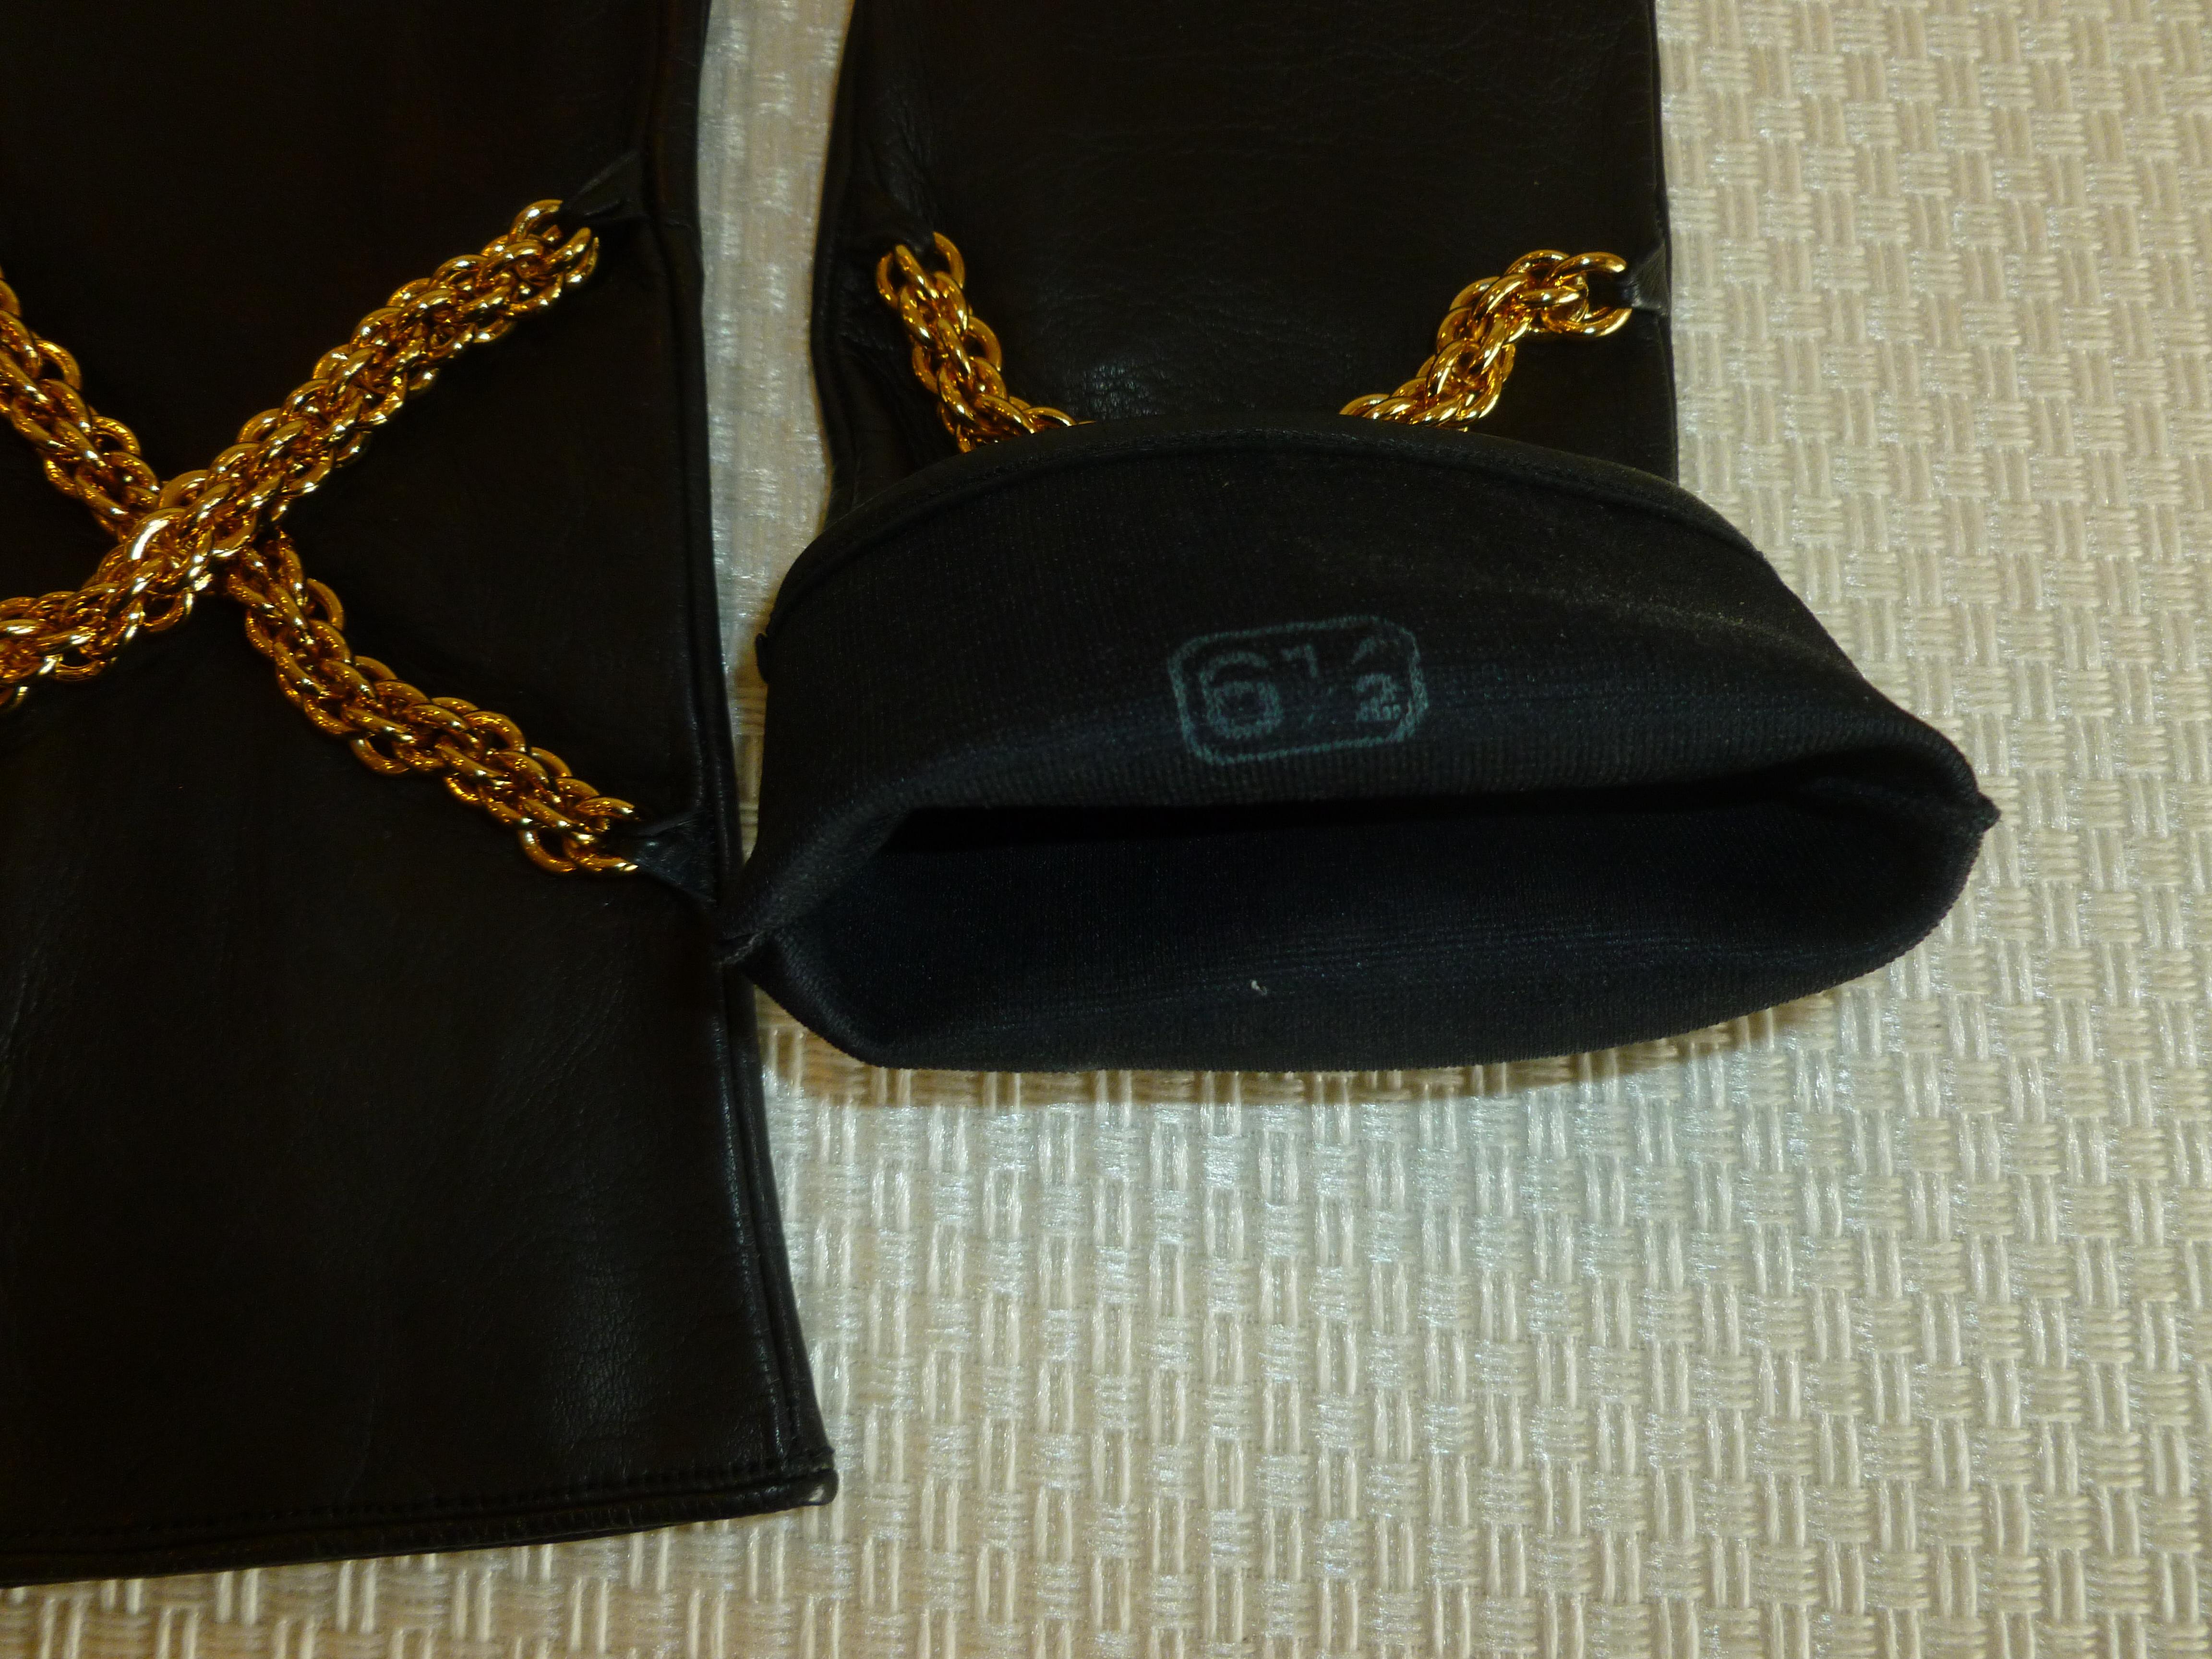  Paloma Picasso Back Leather and Brass Chain Gloves Pair Of 8